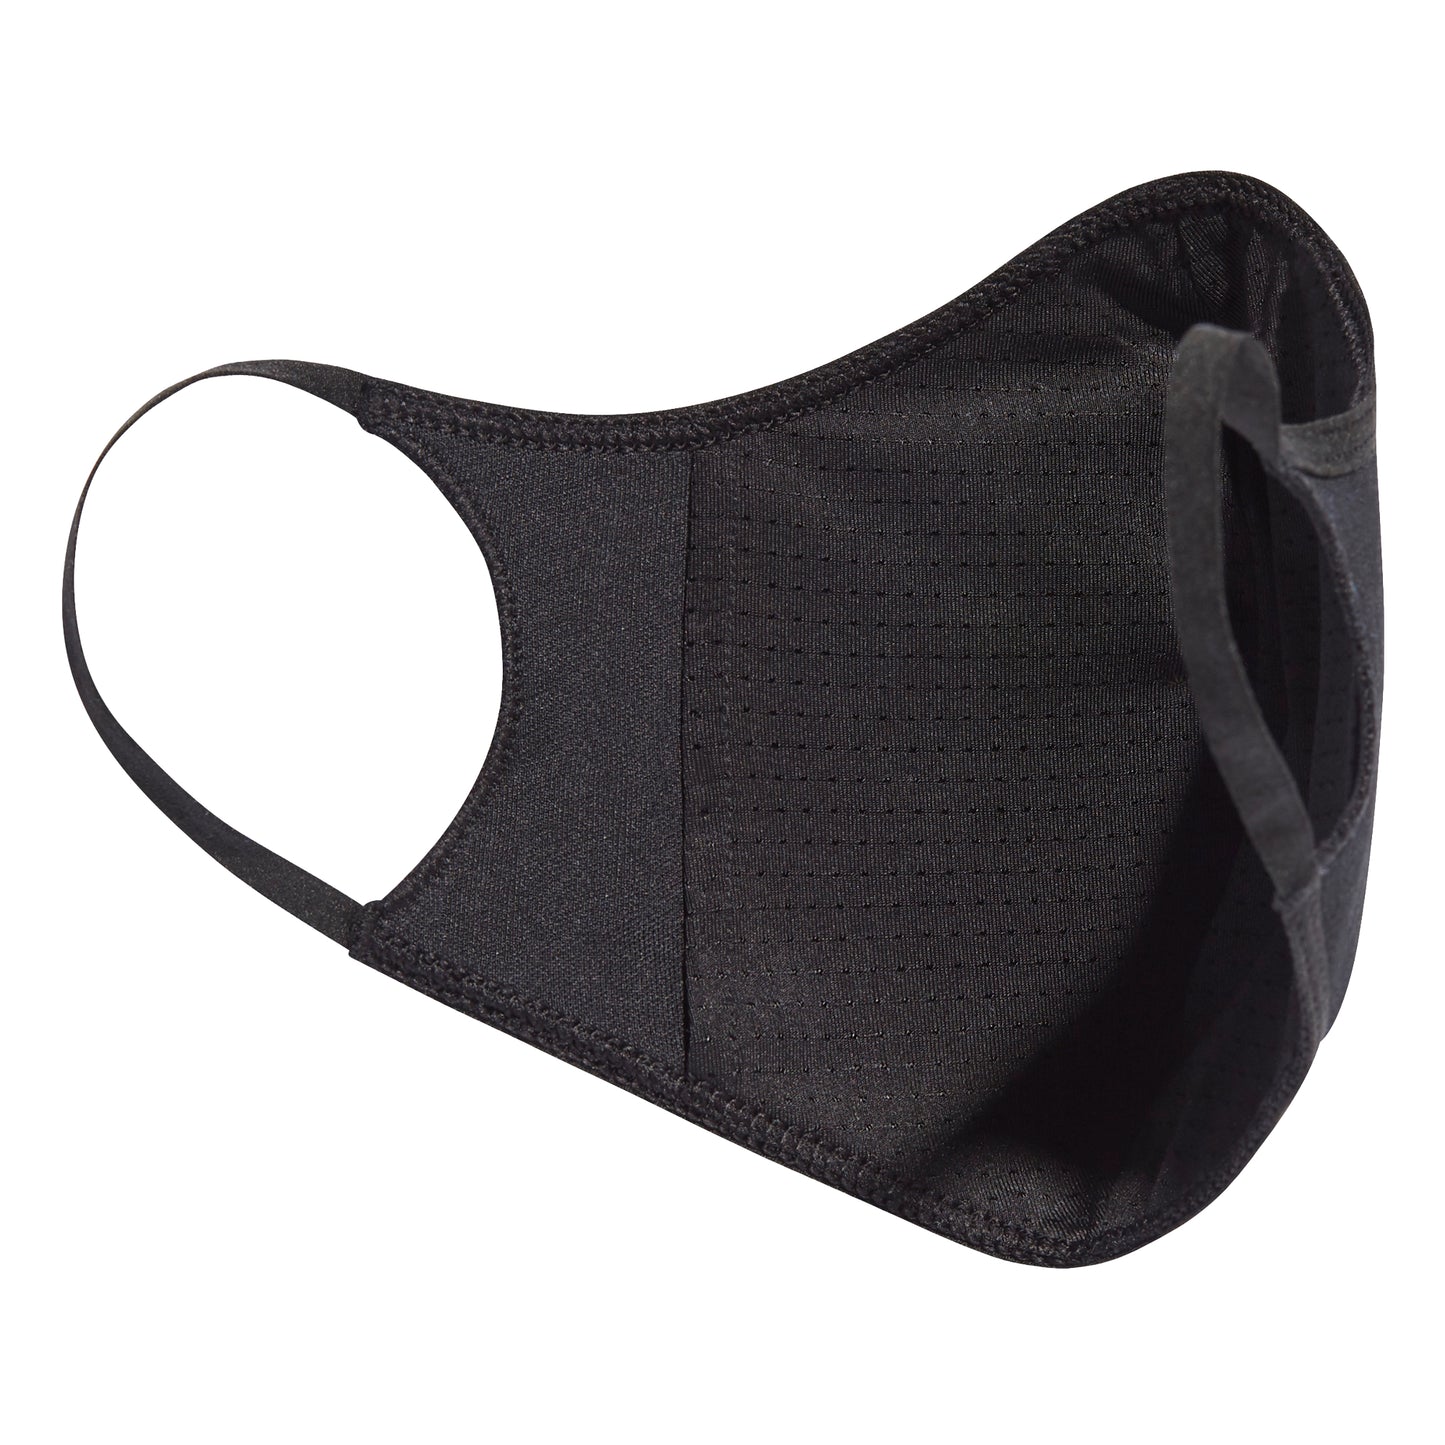 Adidas Face Cover 3-Pack